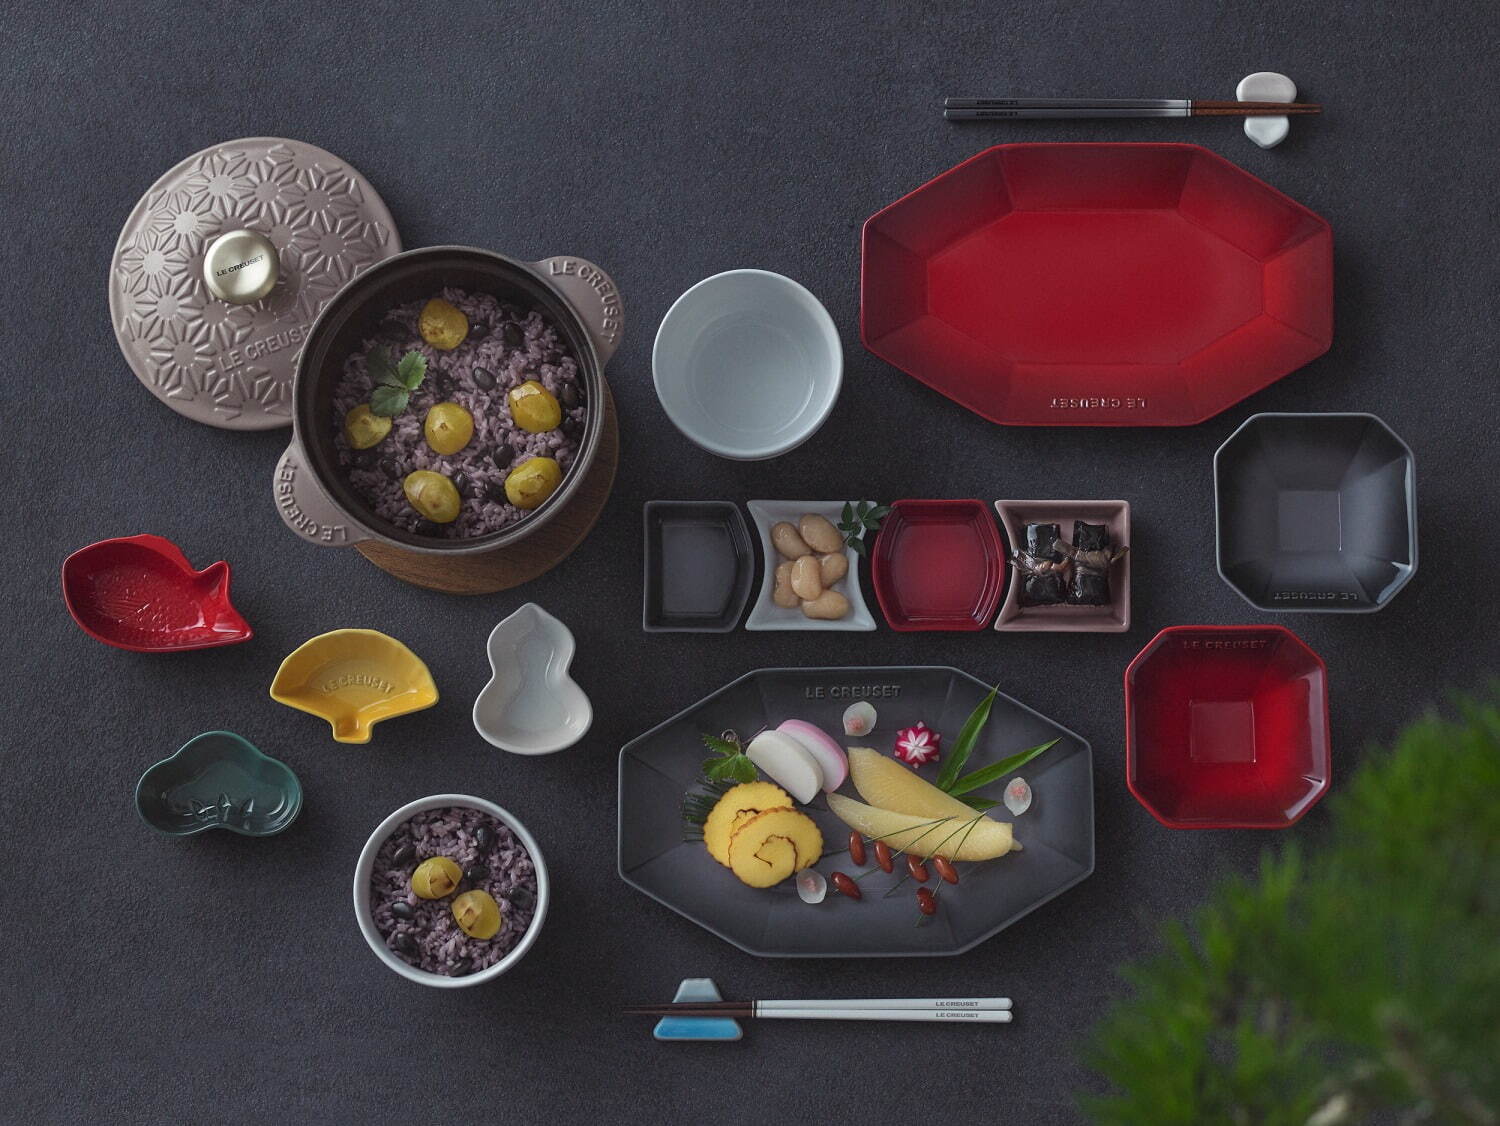 Le Creuset - New! 🌸 The Saucepan with Flower Knob is cheerful and sweet -  and useful too, thanks to its even heat distribution and precise  temperature control. Saucepan with Flower Knob